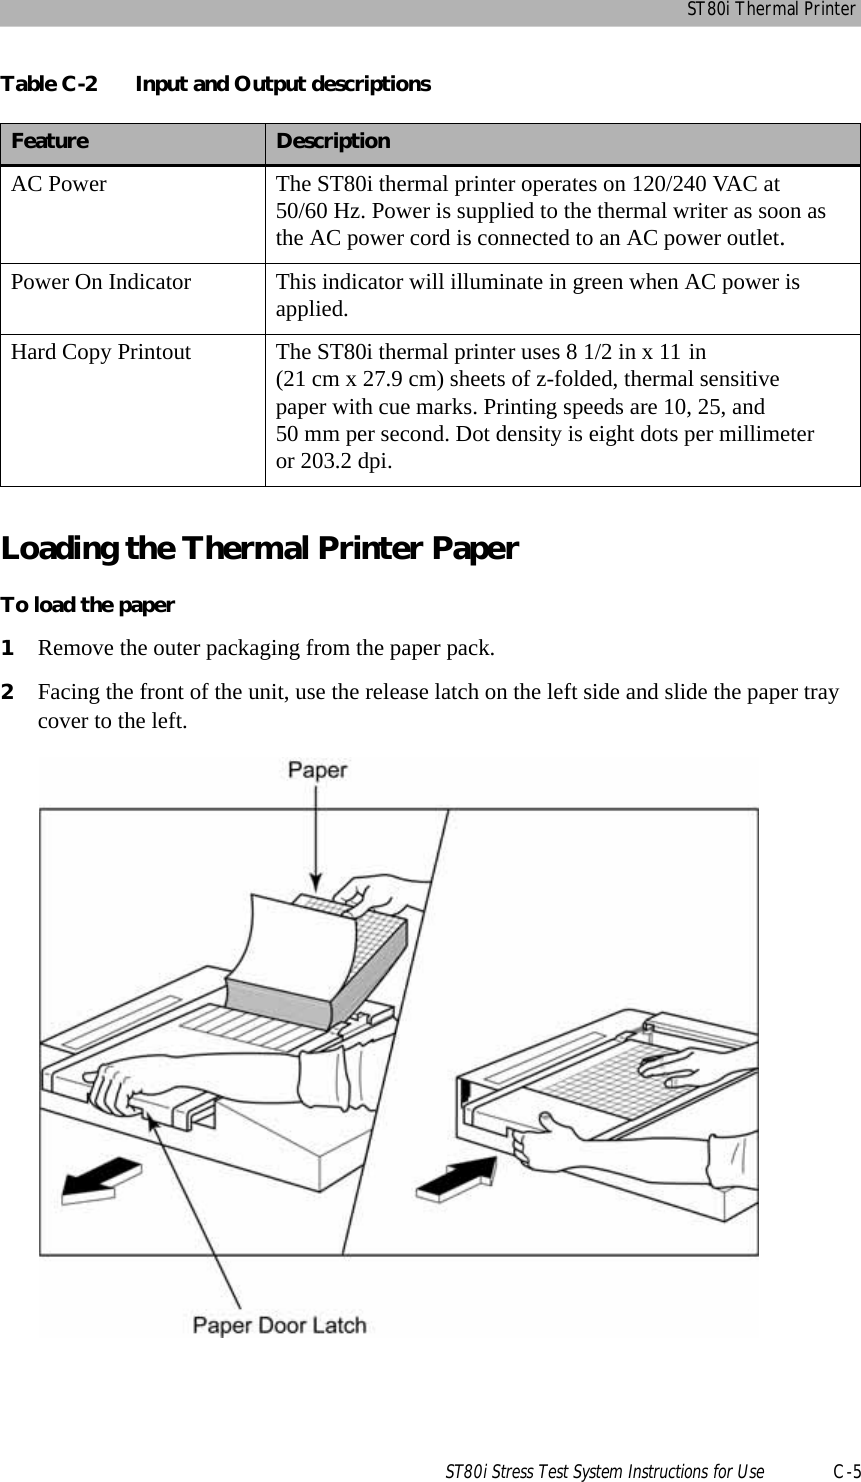 ST80i Thermal PrinterST80i Stress Test System Instructions for Use C-5Loading the Thermal Printer PaperTo load the paper 1Remove the outer packaging from the paper pack.2Facing the front of the unit, use the release latch on the left side and slide the paper tray cover to the left.Table C-2 Input and Output descriptions Feature DescriptionAC Power The ST80i thermal printer operates on 120/240 VAC at 50/60 Hz. Power is supplied to the thermal writer as soon as the AC power cord is connected to an AC power outlet.Power On Indicator This indicator will illuminate in green when AC power is applied.Hard Copy Printout The ST80i thermal printer uses 8 1/2 in x 11 in (21 cm x 27.9 cm) sheets of z-folded, thermal sensitive paper with cue marks. Printing speeds are 10, 25, and 50 mm per second. Dot density is eight dots per millimeter or 203.2 dpi.